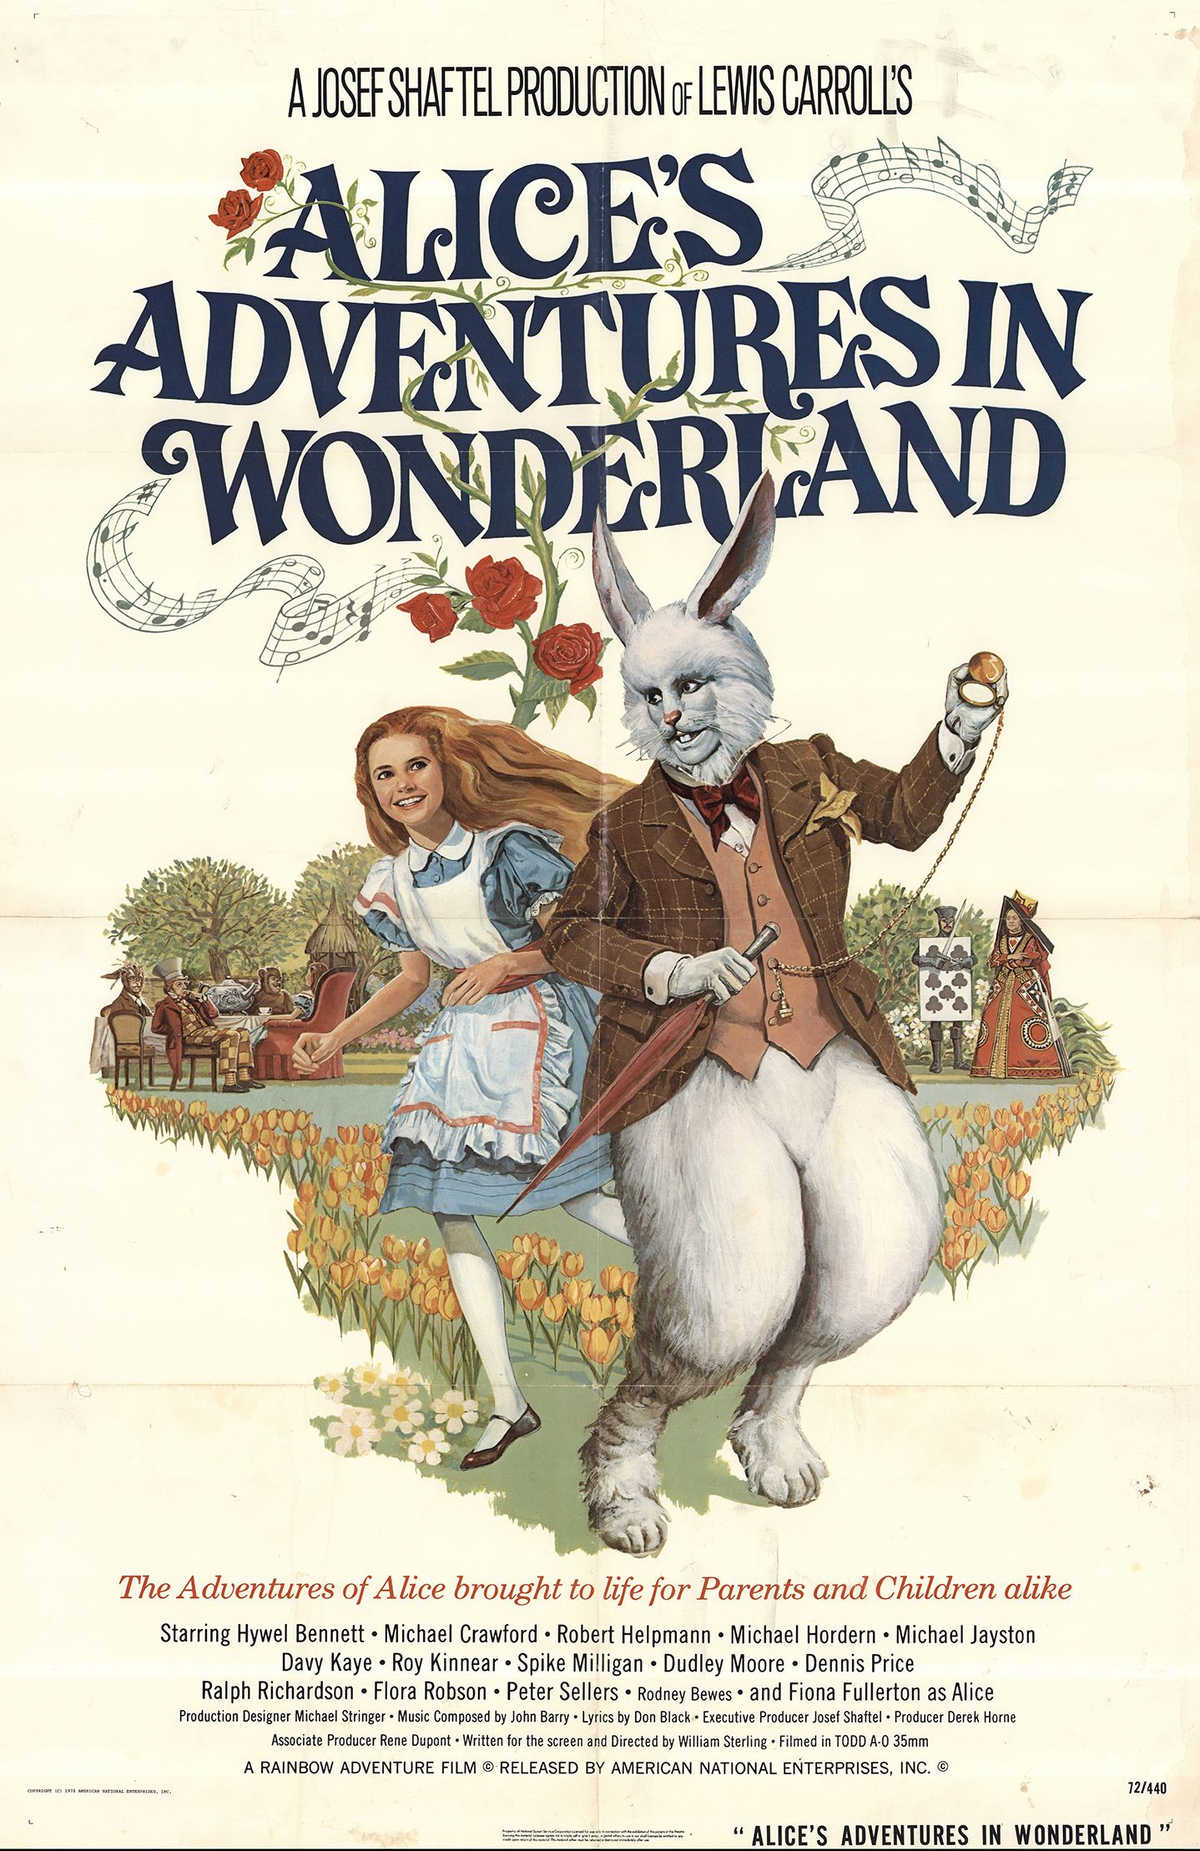 https://static.wikia.nocookie.net/looking-glass/images/7/77/Alice%27s_Adventures_in_Wonderland_1972.png/revision/latest/scale-to-width-down/1200?cb=20221017000918